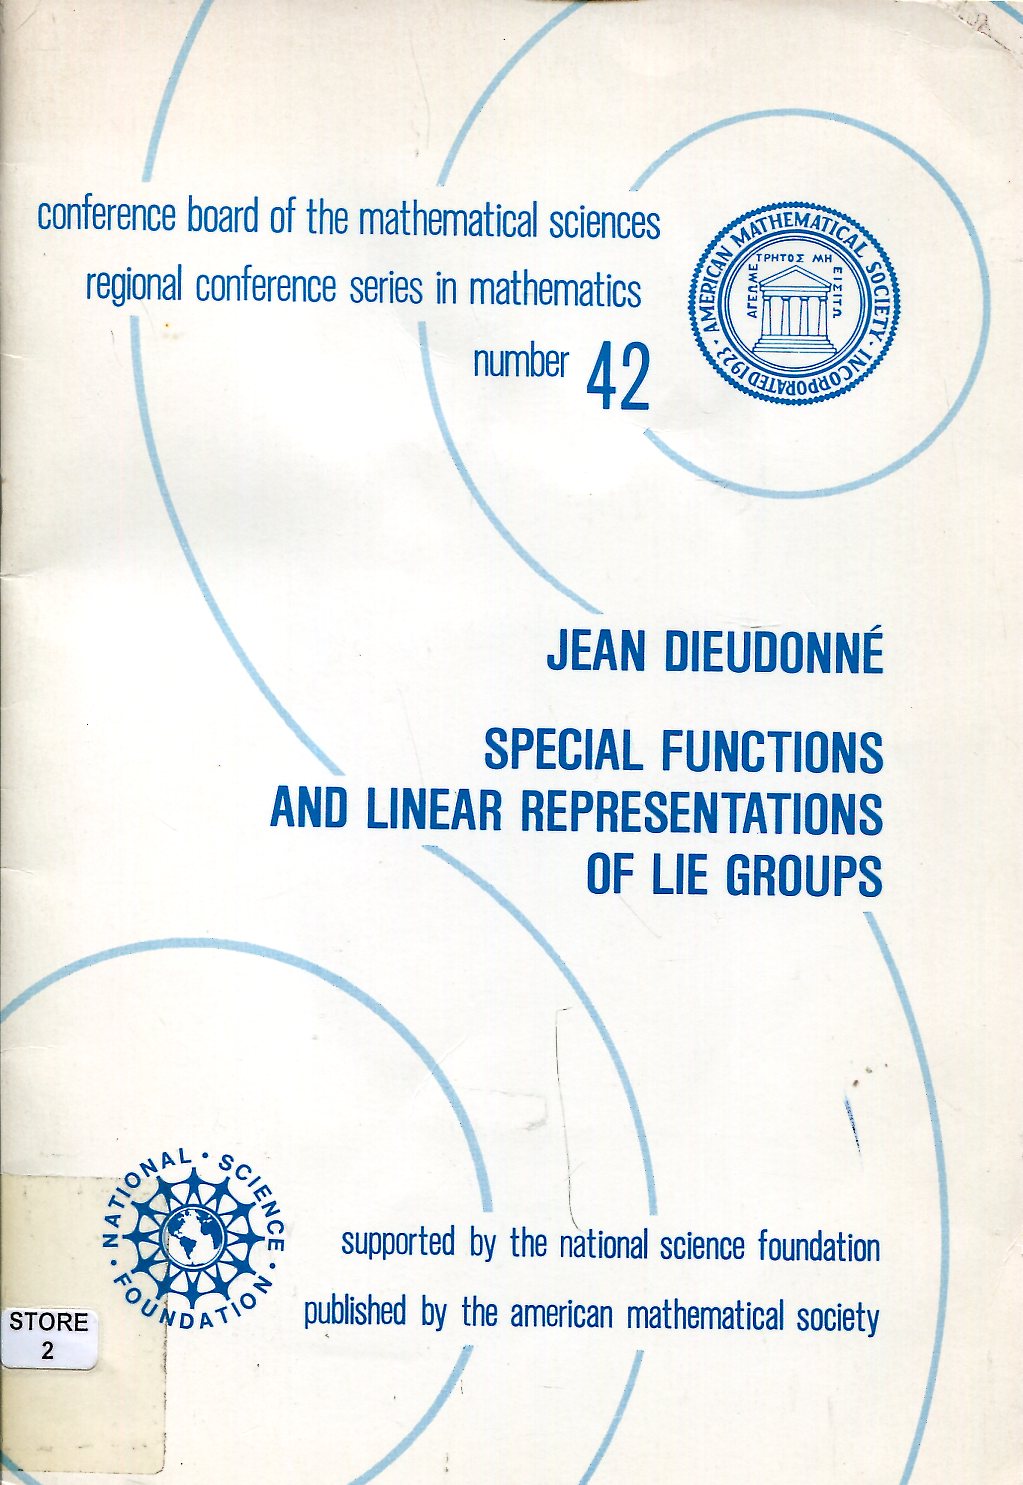 Special functions and linear representations of Lie groups - DIEUDONNE Jean